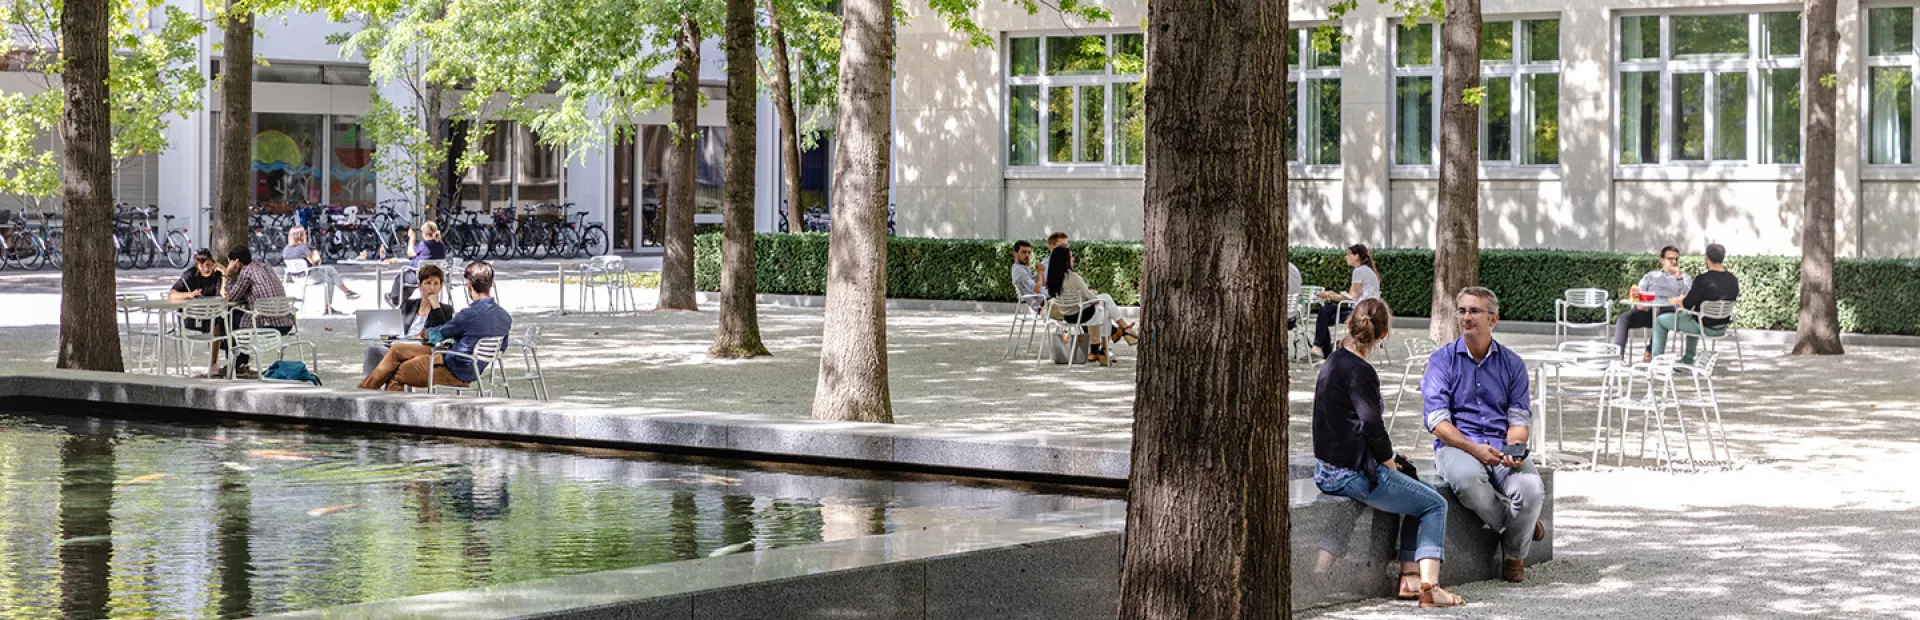 People seated in a courtyard shaded by trees with  a large pond to the left